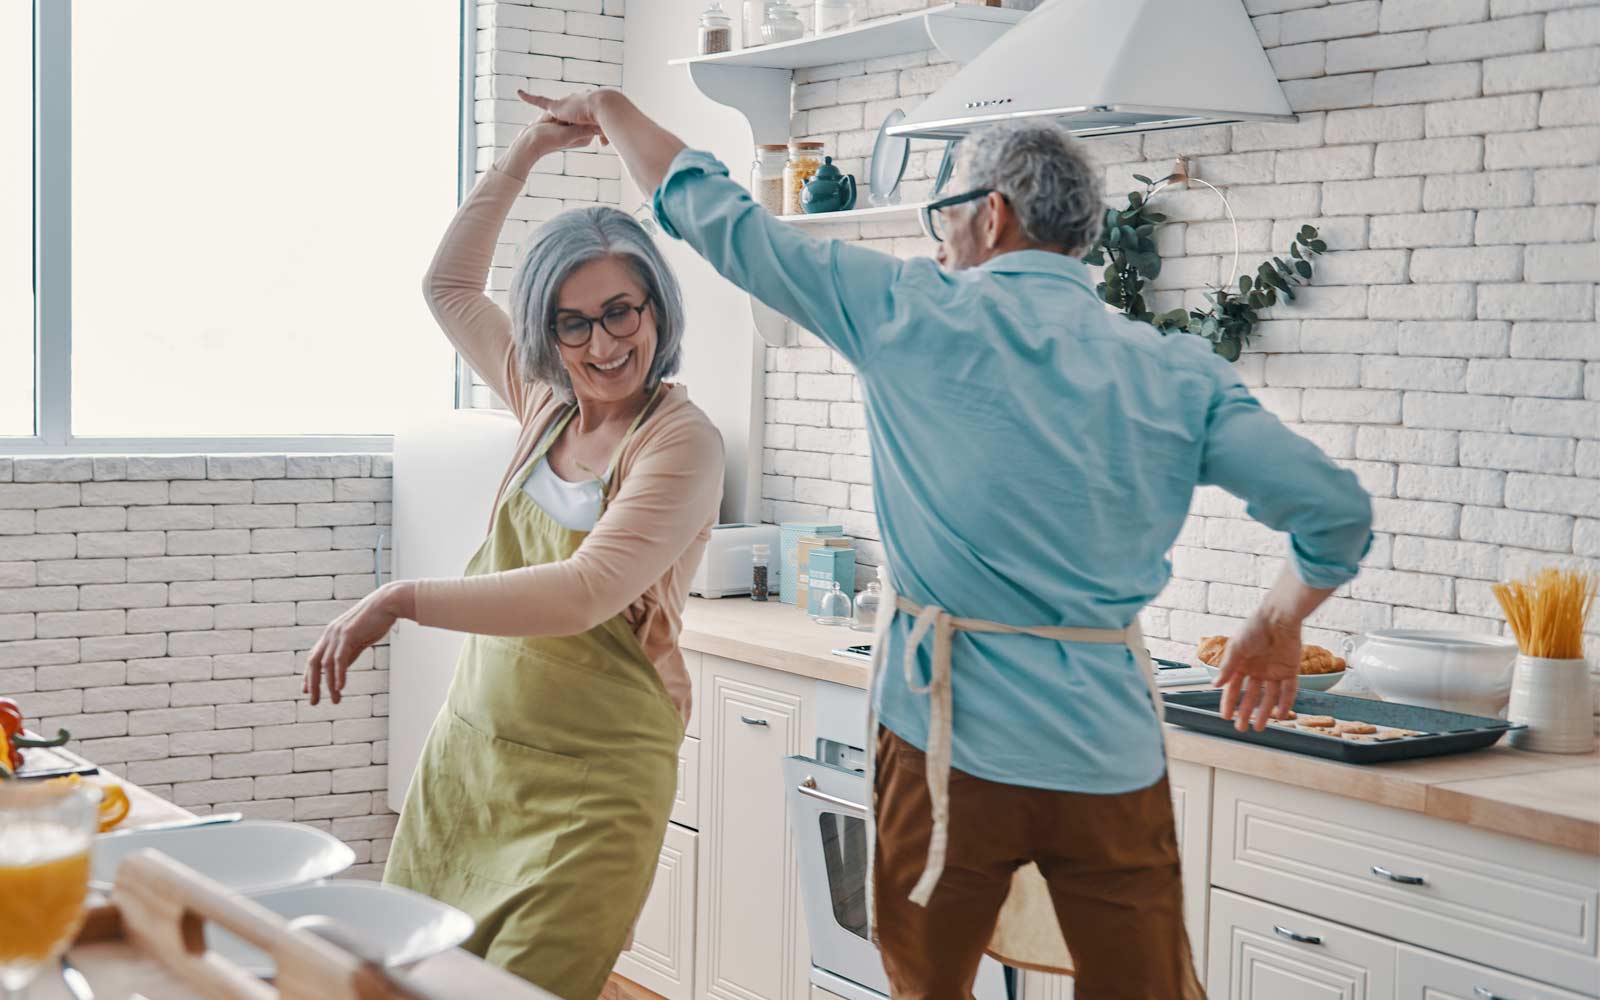 A happy couple dance in their kitchen